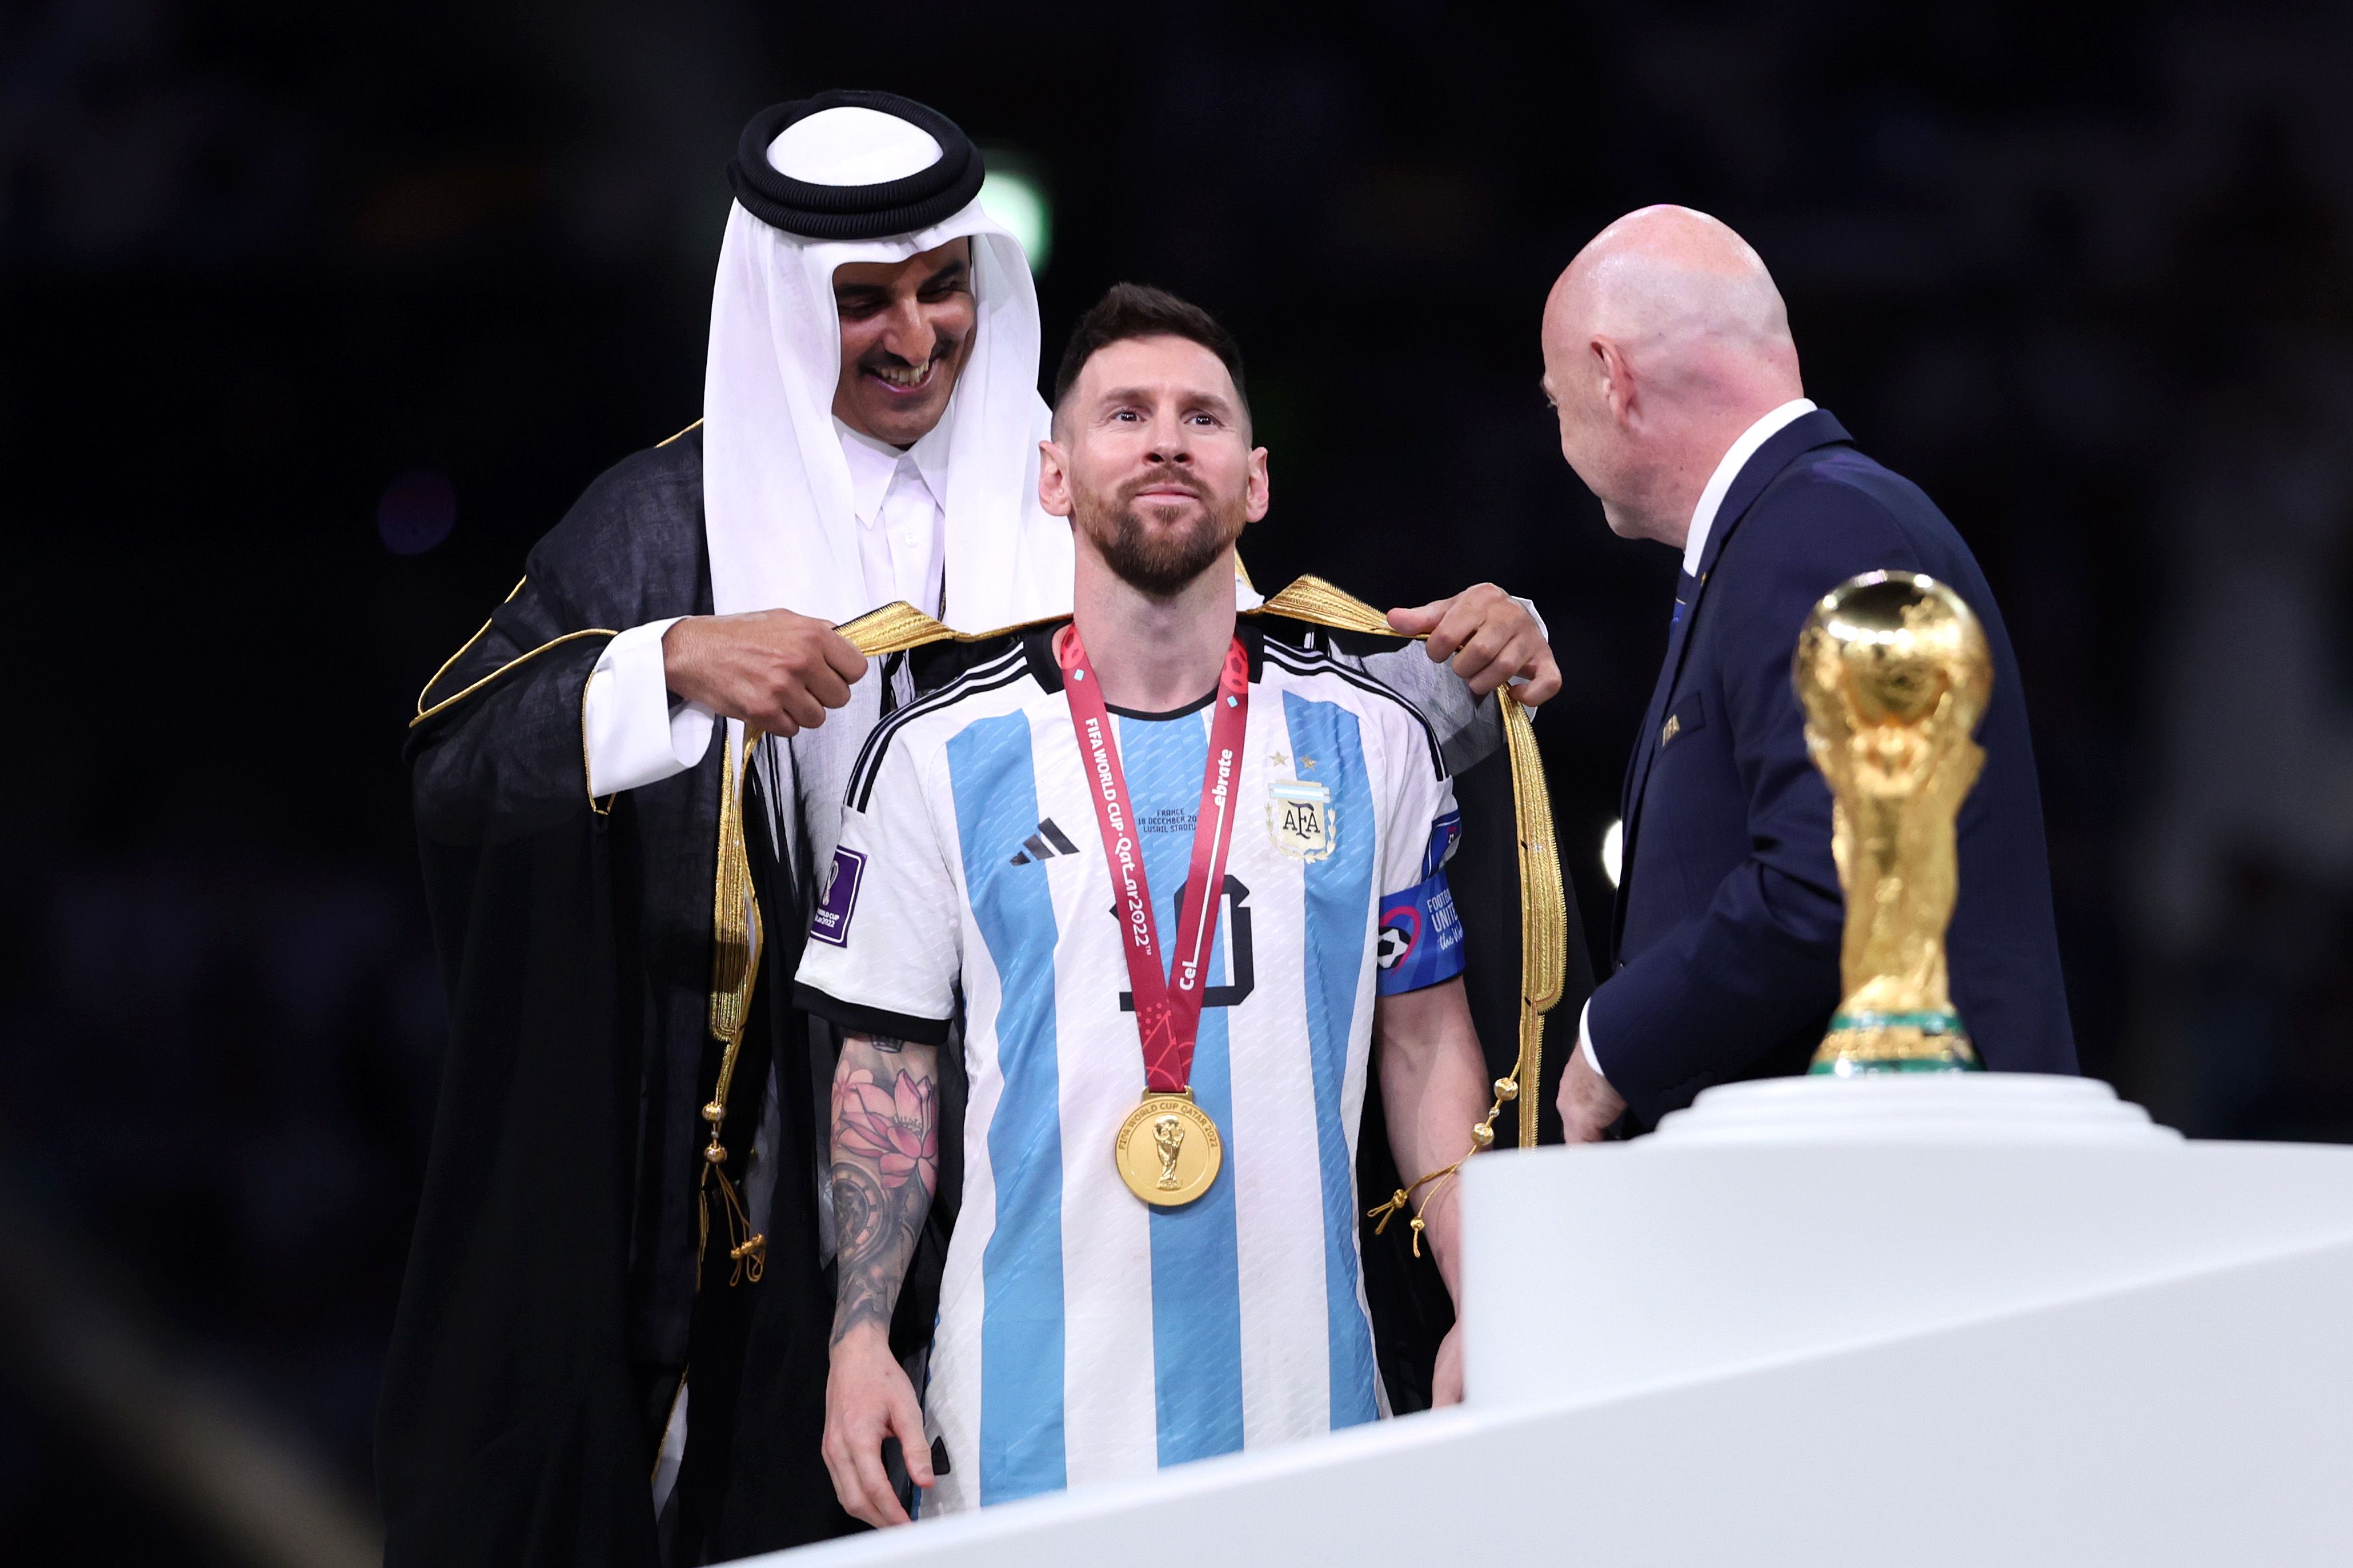 Reaction to Lionel Messi wearing a bisht while lifting the World